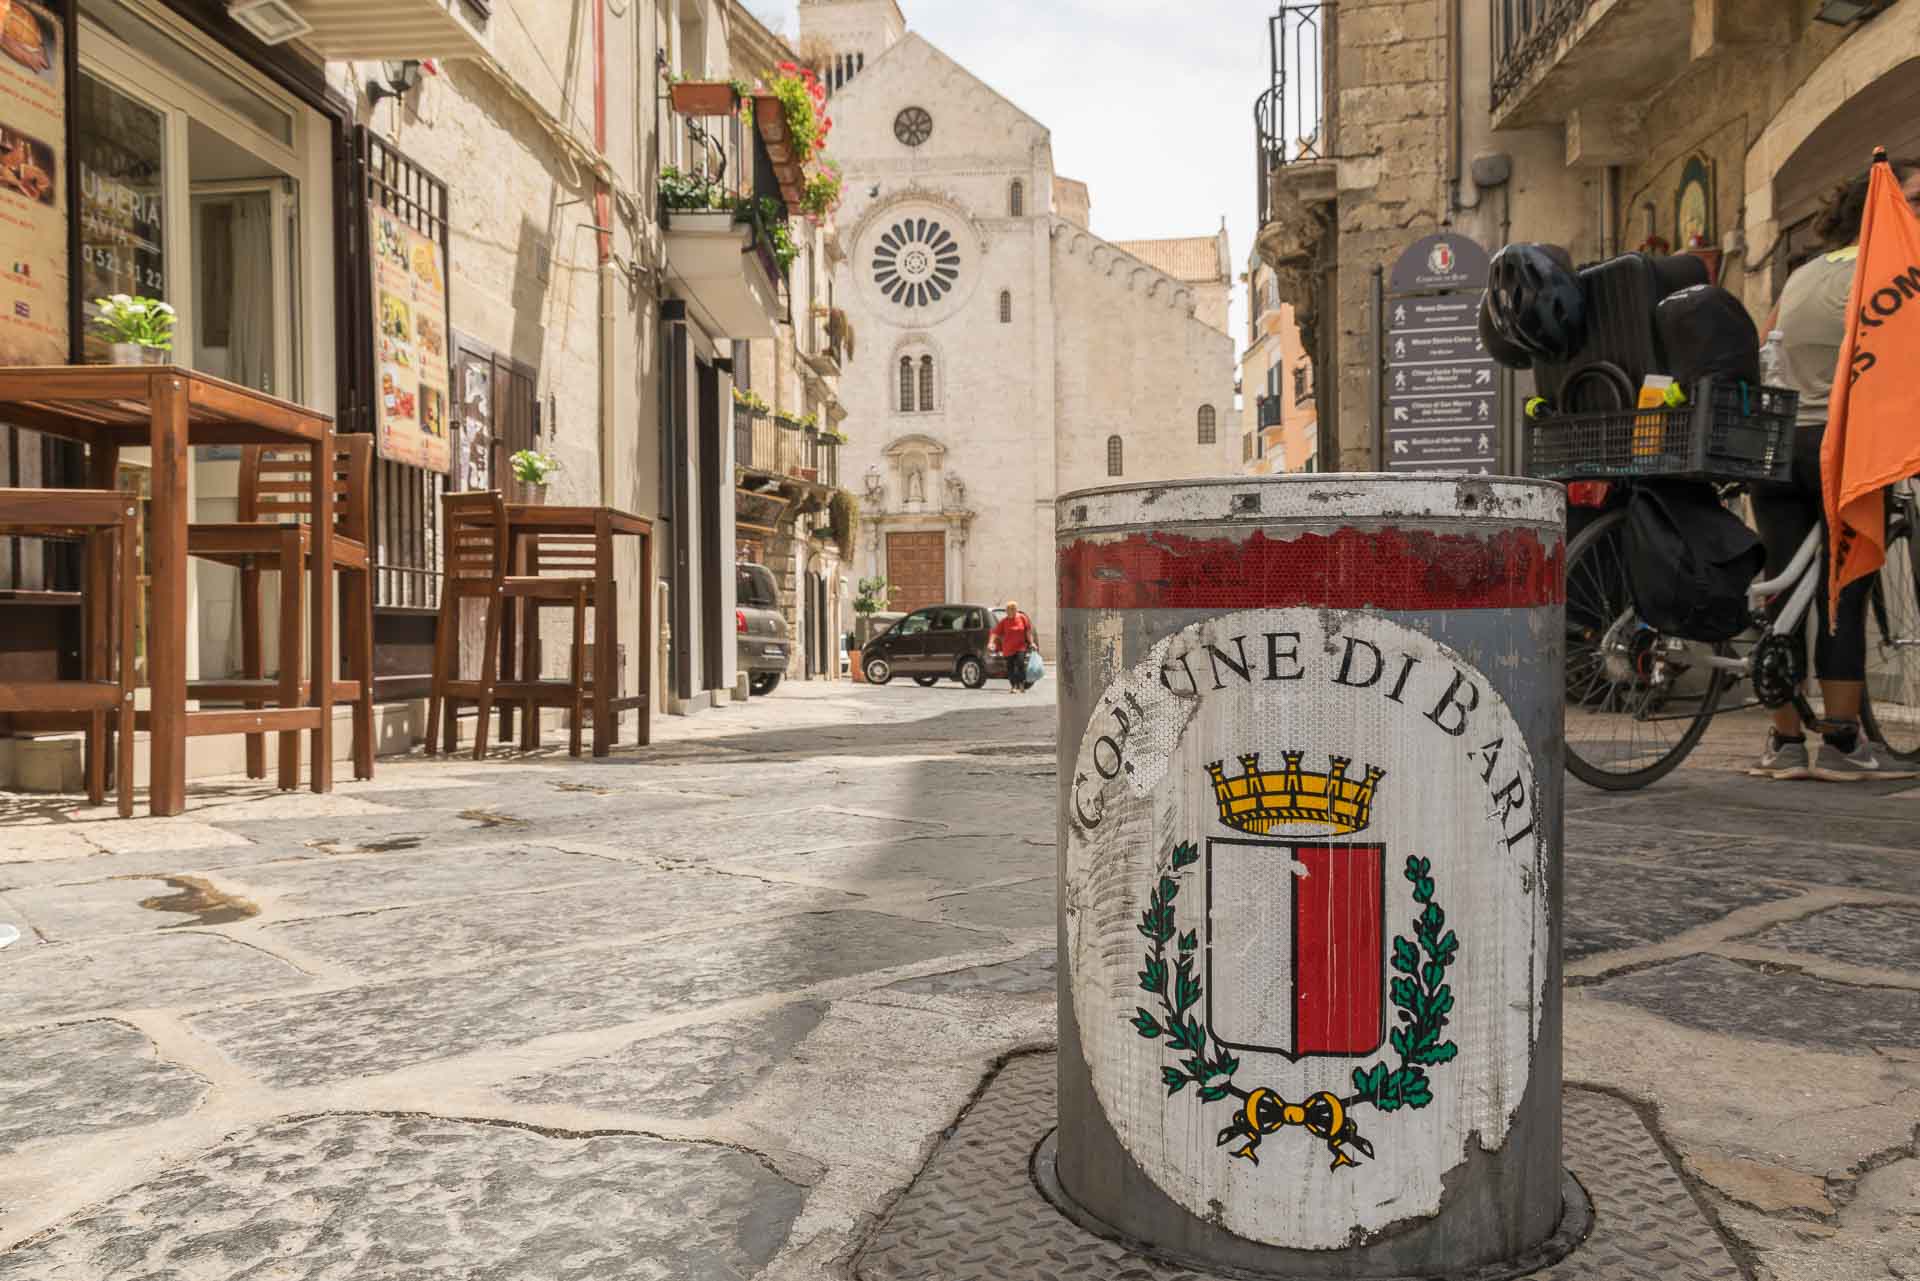 One of the streets of Bari, to put in your Puglia itinerary, with a comune sign